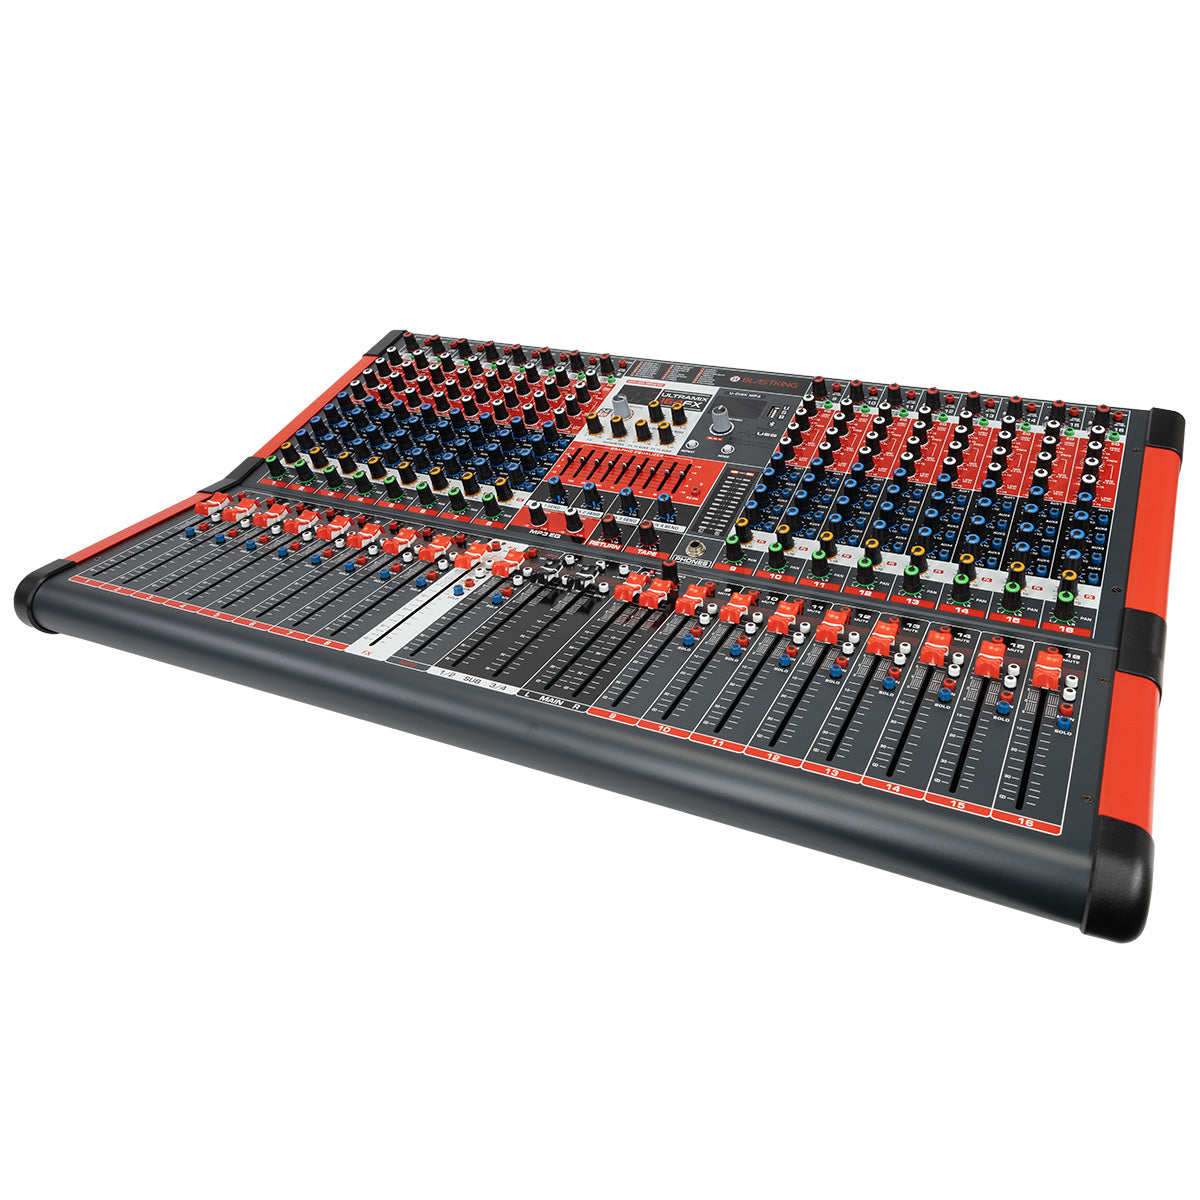 Blastking ULTRAMIX-164FX 16 Channel Professional Mixing Console with 4 Aux and DSP